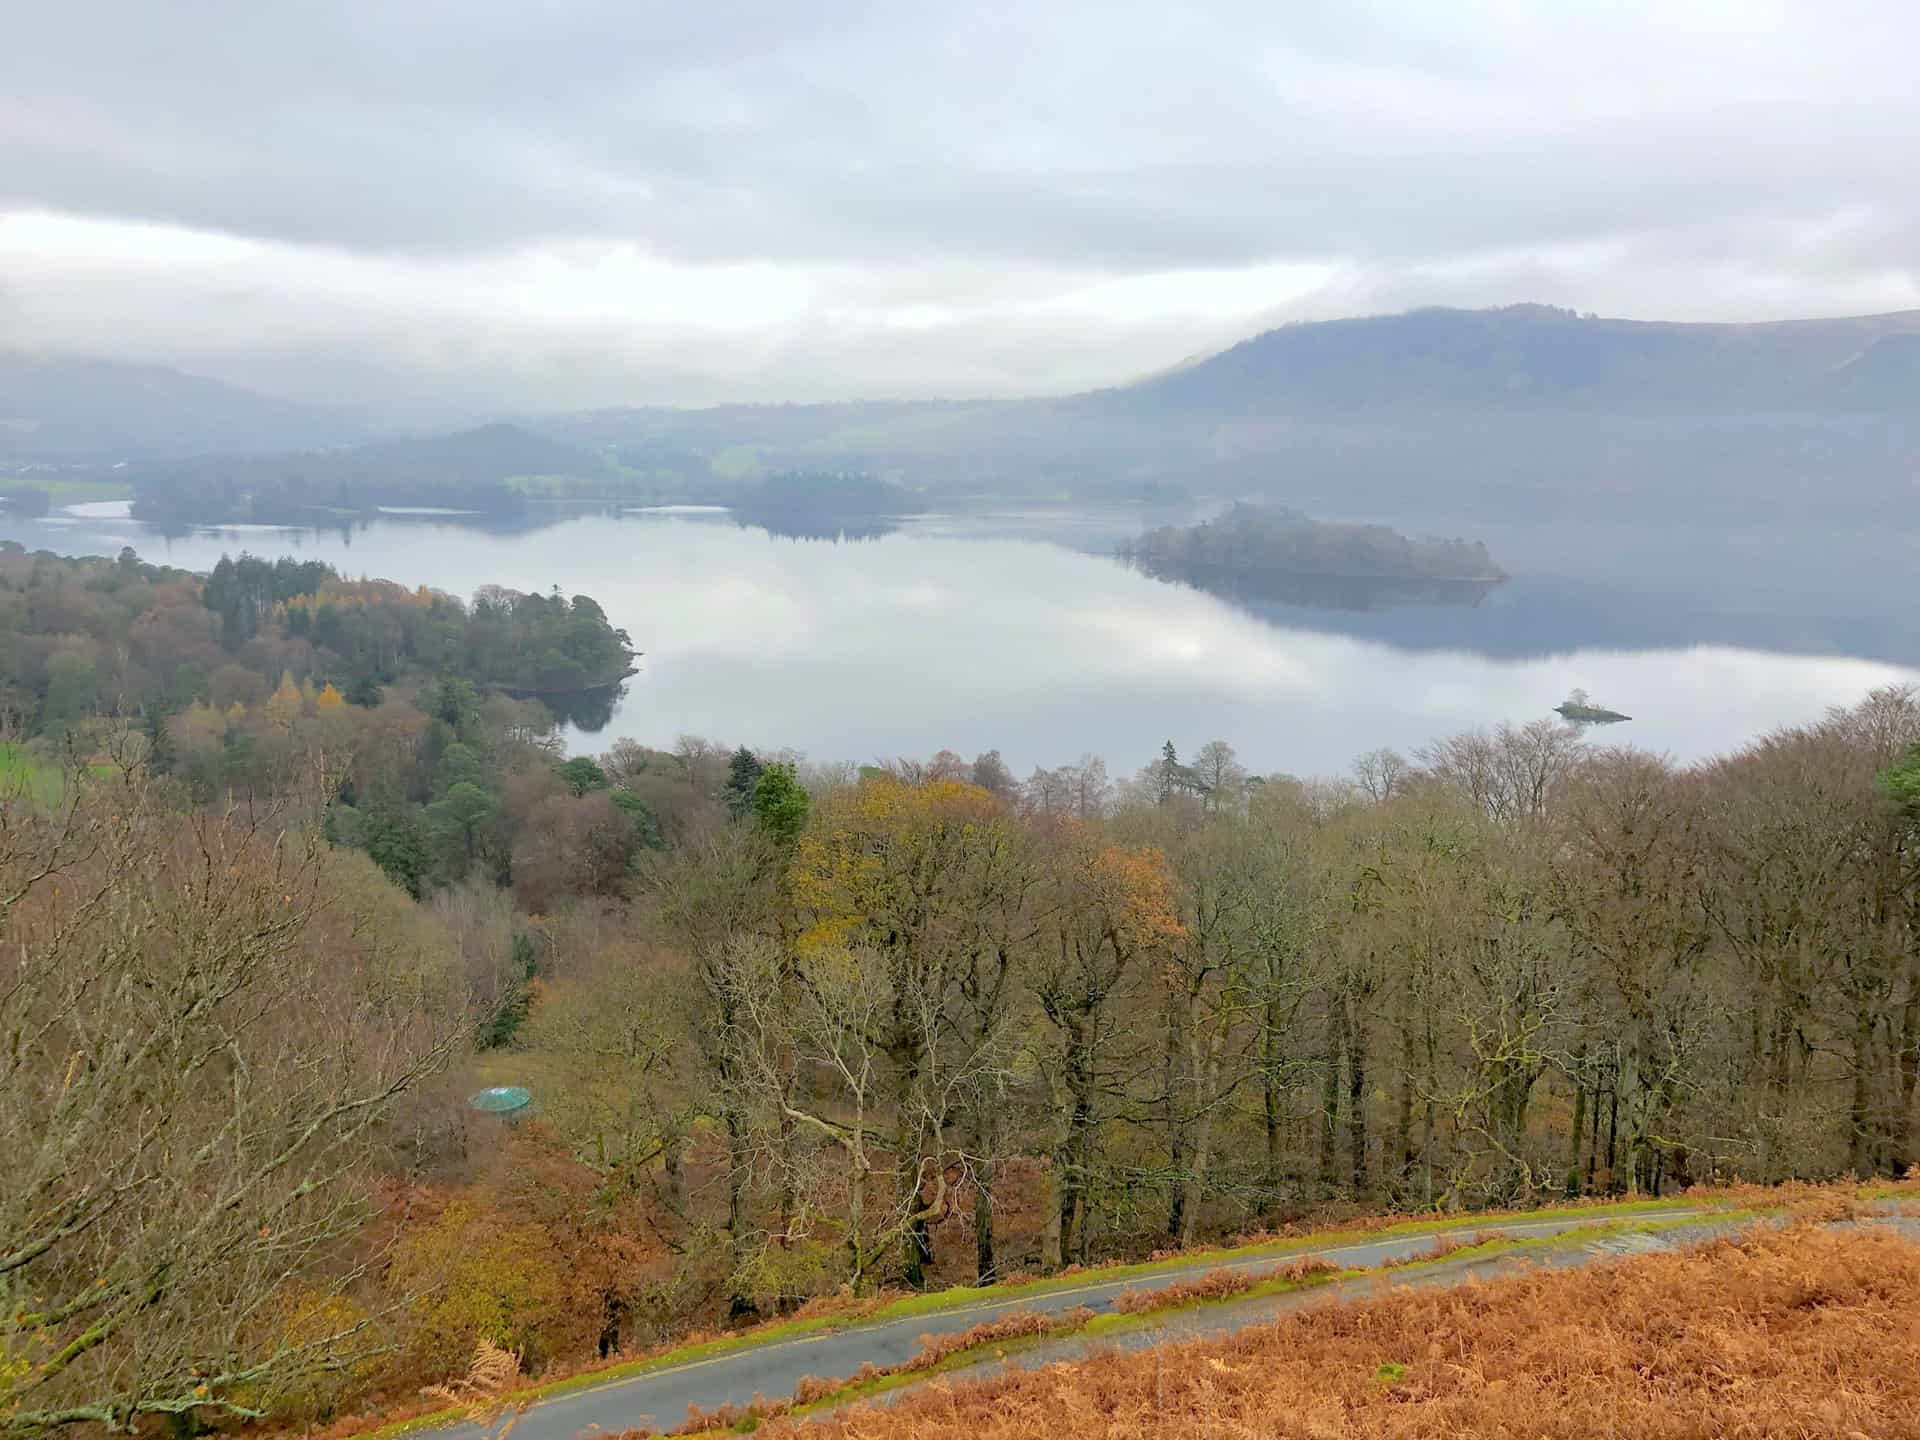 The view over Derwent Water from Skelgill Bank on a misty but very atmospheric morning.